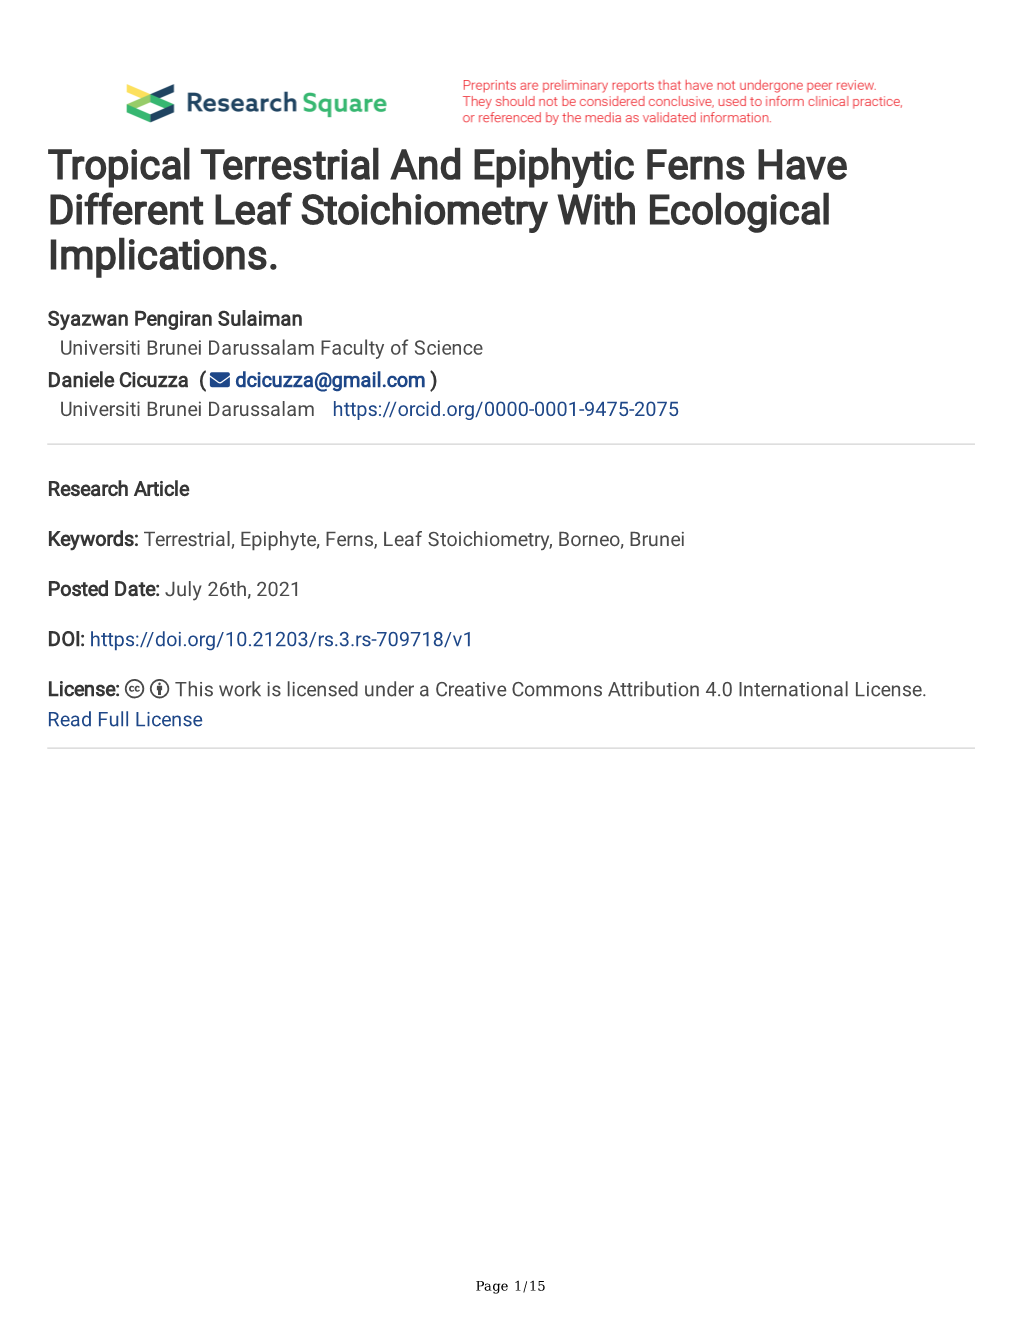 Tropical Terrestrial and Epiphytic Ferns Have Different Leaf Stoichiometry with Ecological Implications